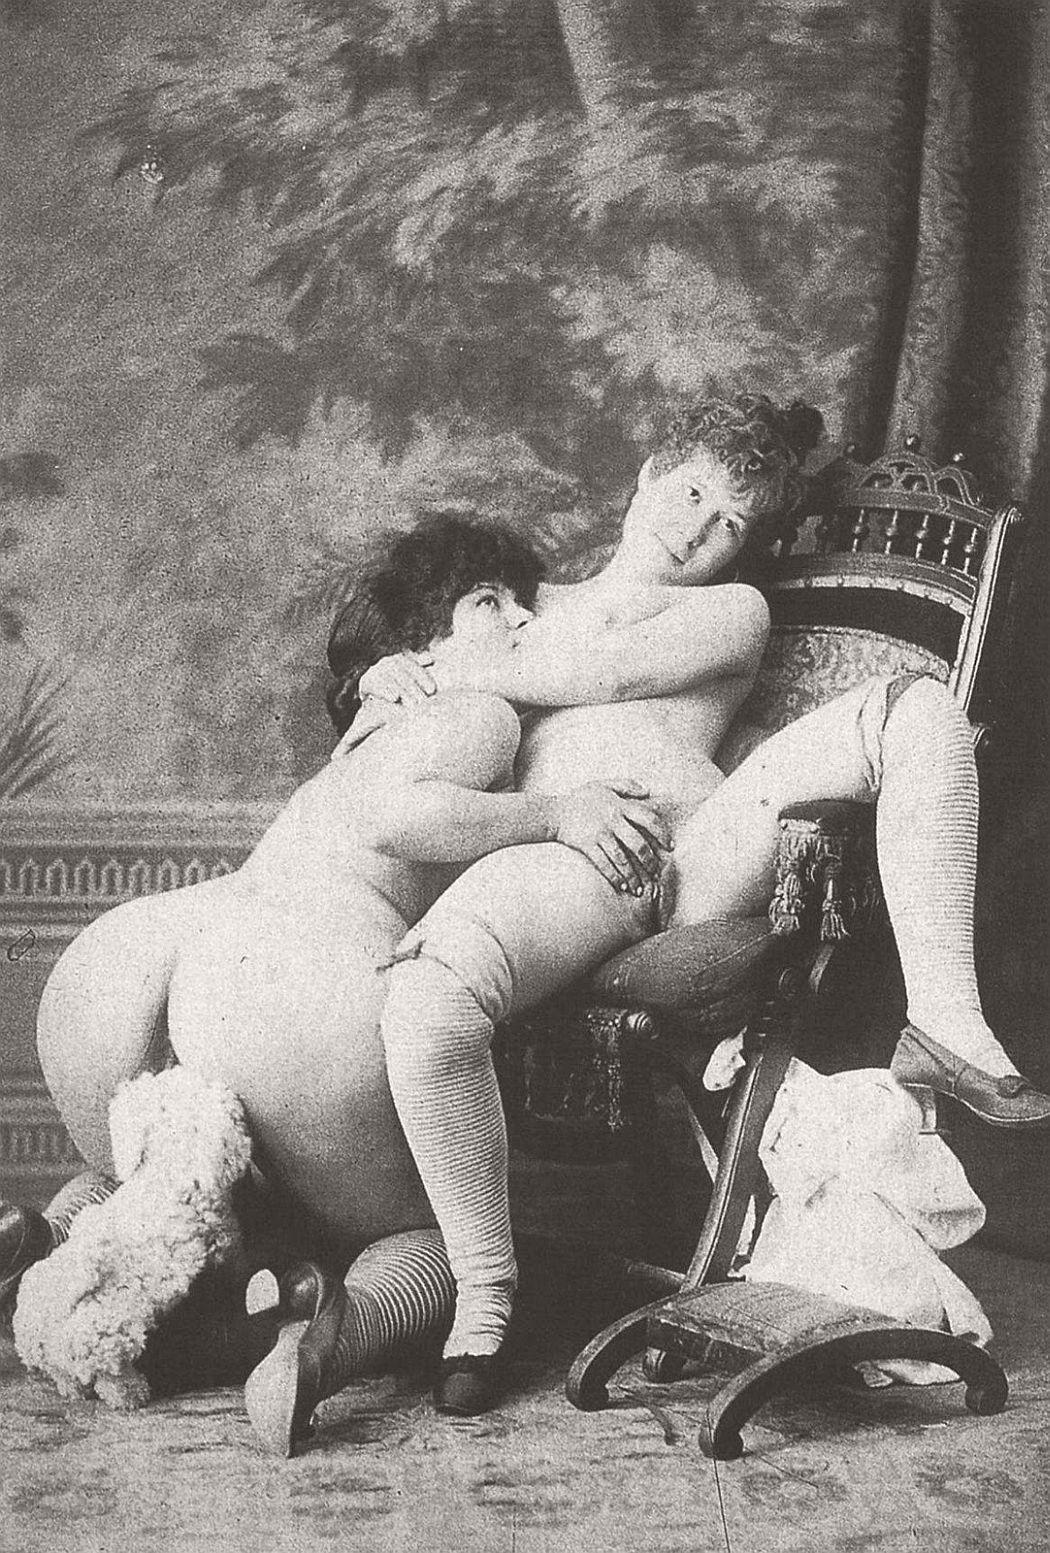 A history of erotic photography